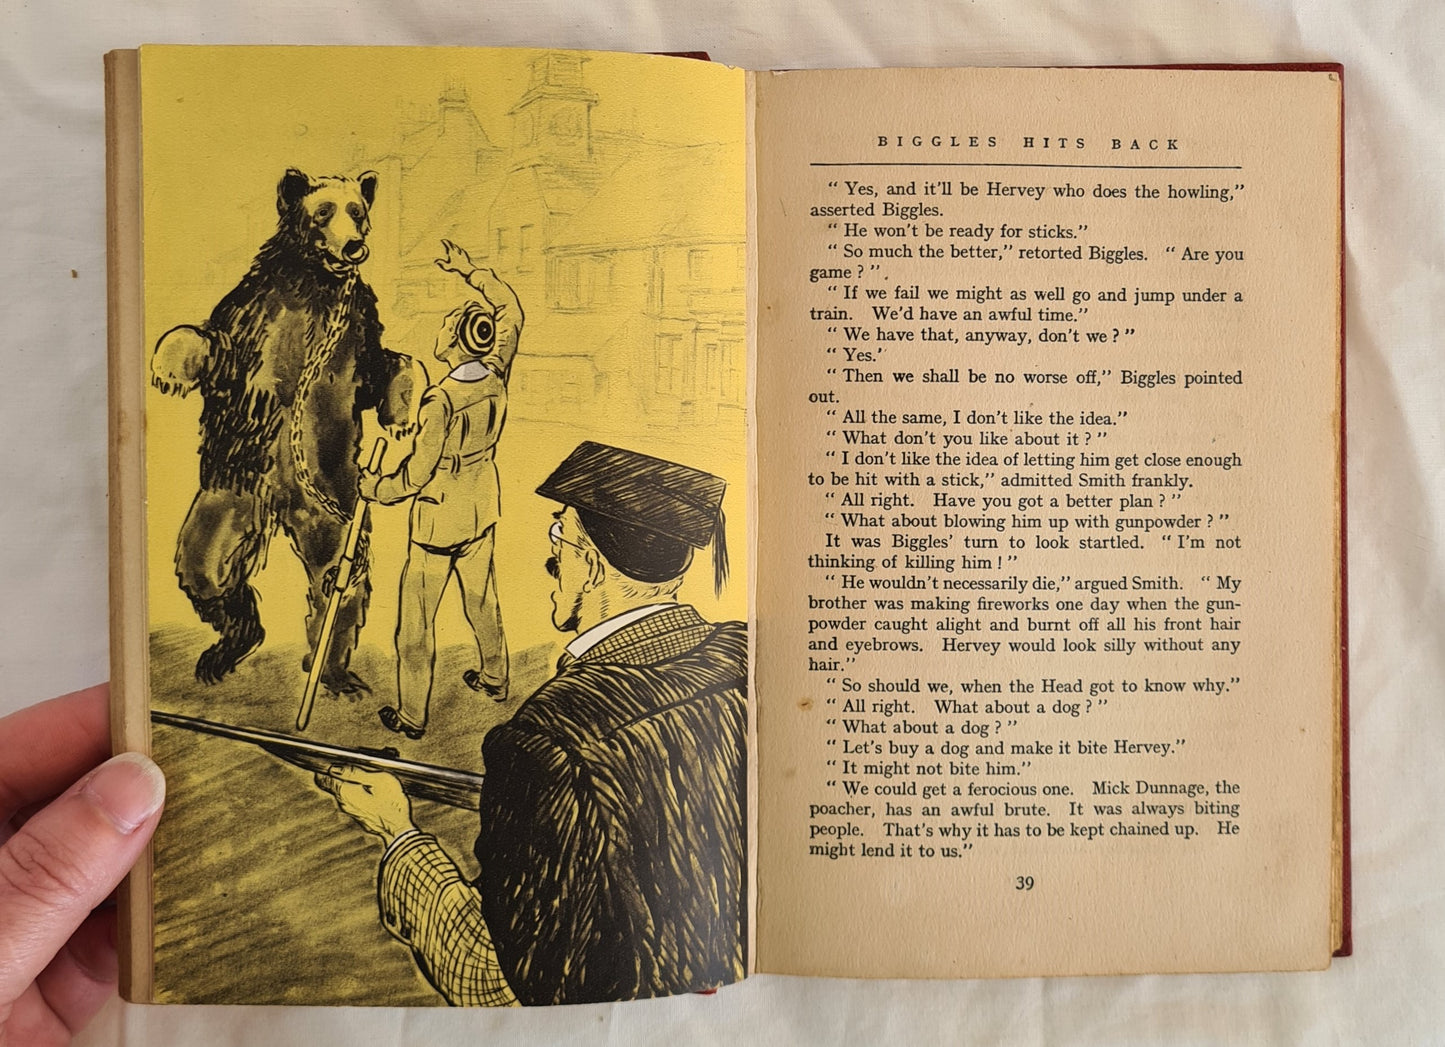 Biggles Goes to School by Capt. W. E. Johns